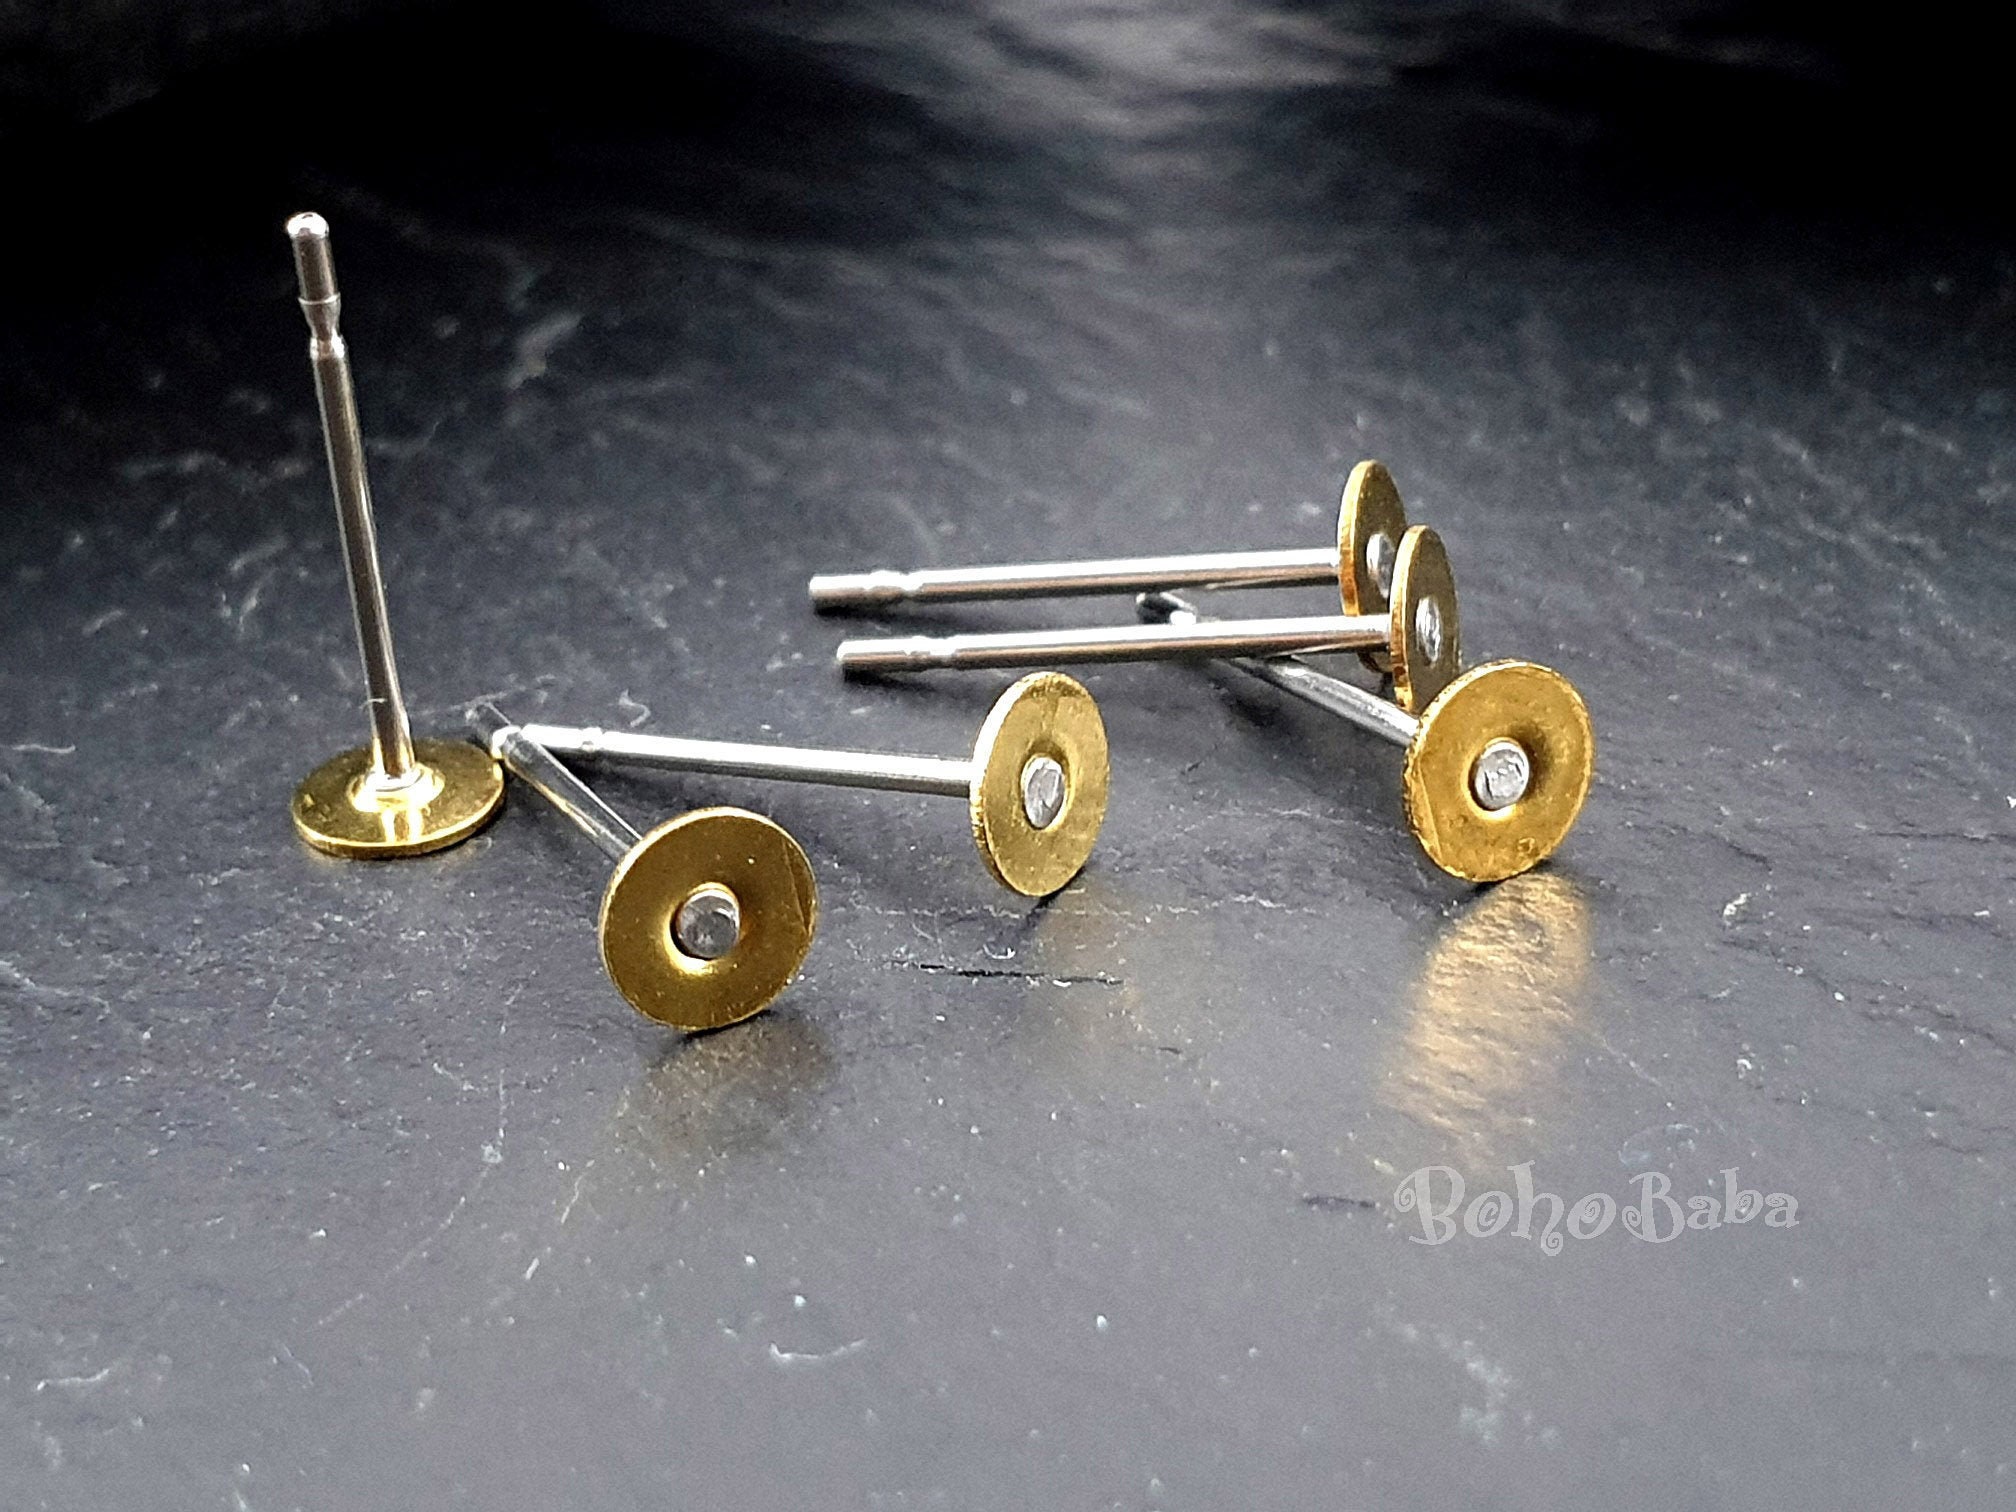 Stainless Steel 4mm Flat Pad Earring Posts with Pair of Backs